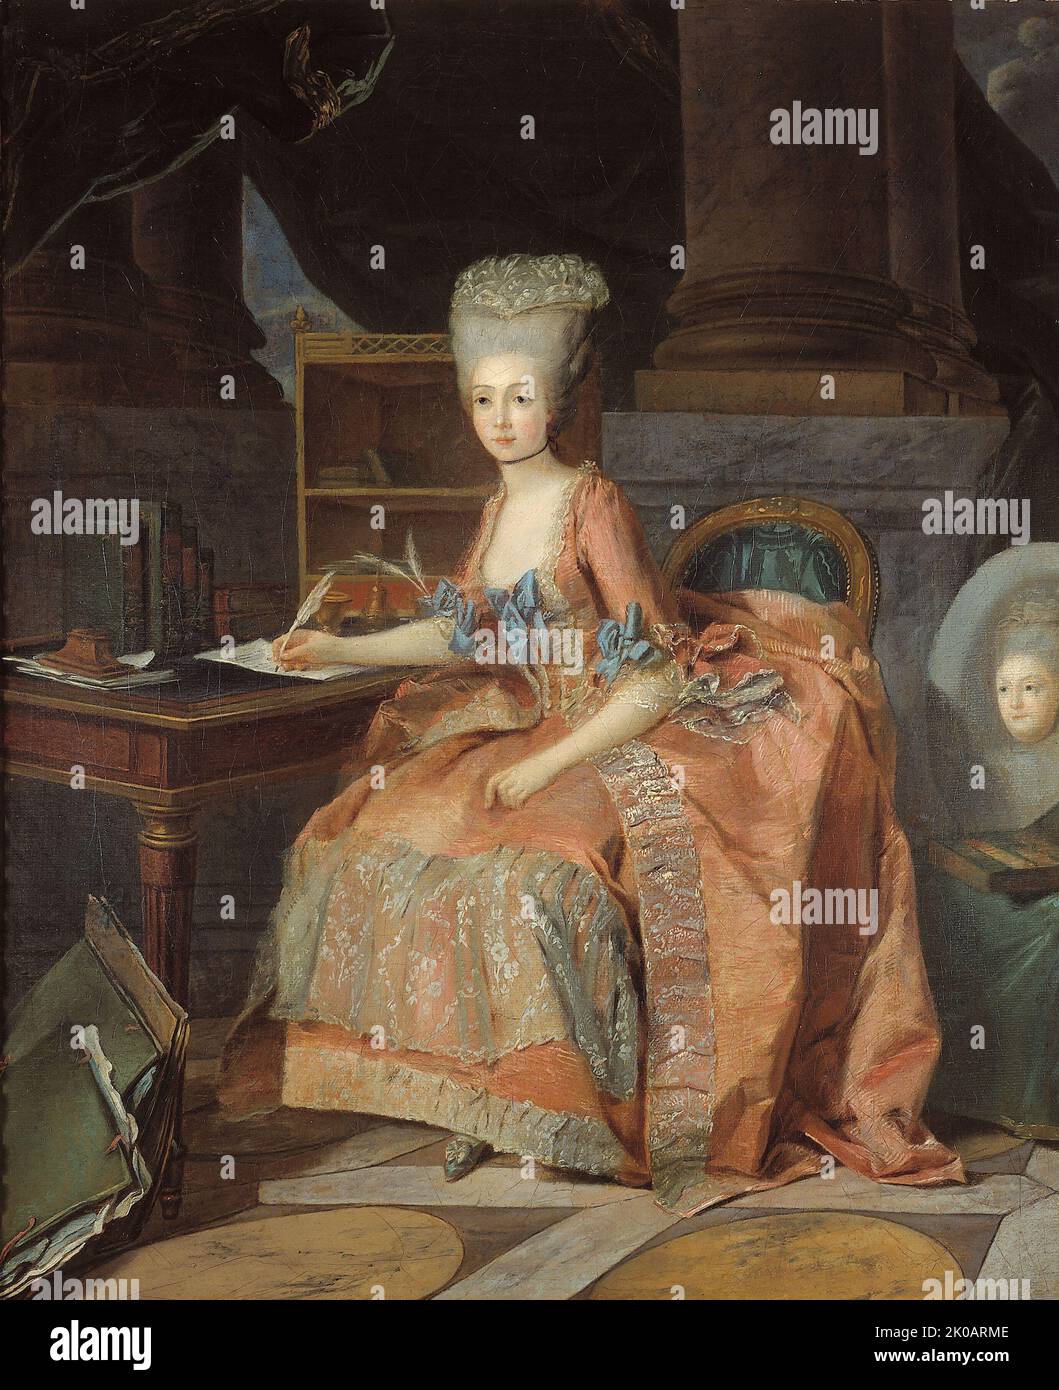 Portrait thought to be Marie-Therese of Savoy, Countess of Artois, c1776. Stock Photo